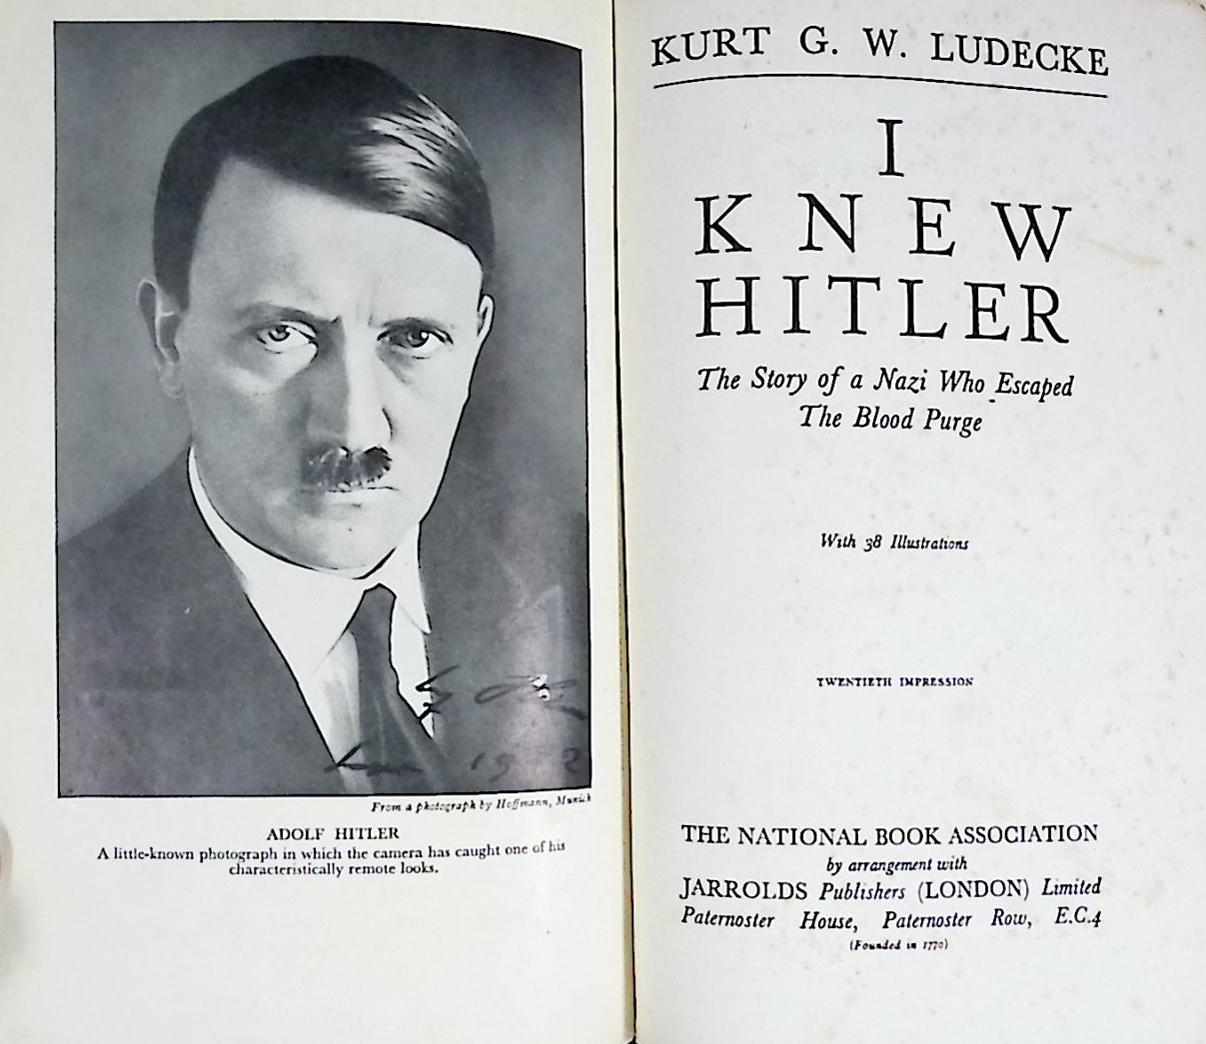 I Knew Hitler. The Story of a Nazi who Escaped the Blood Purge